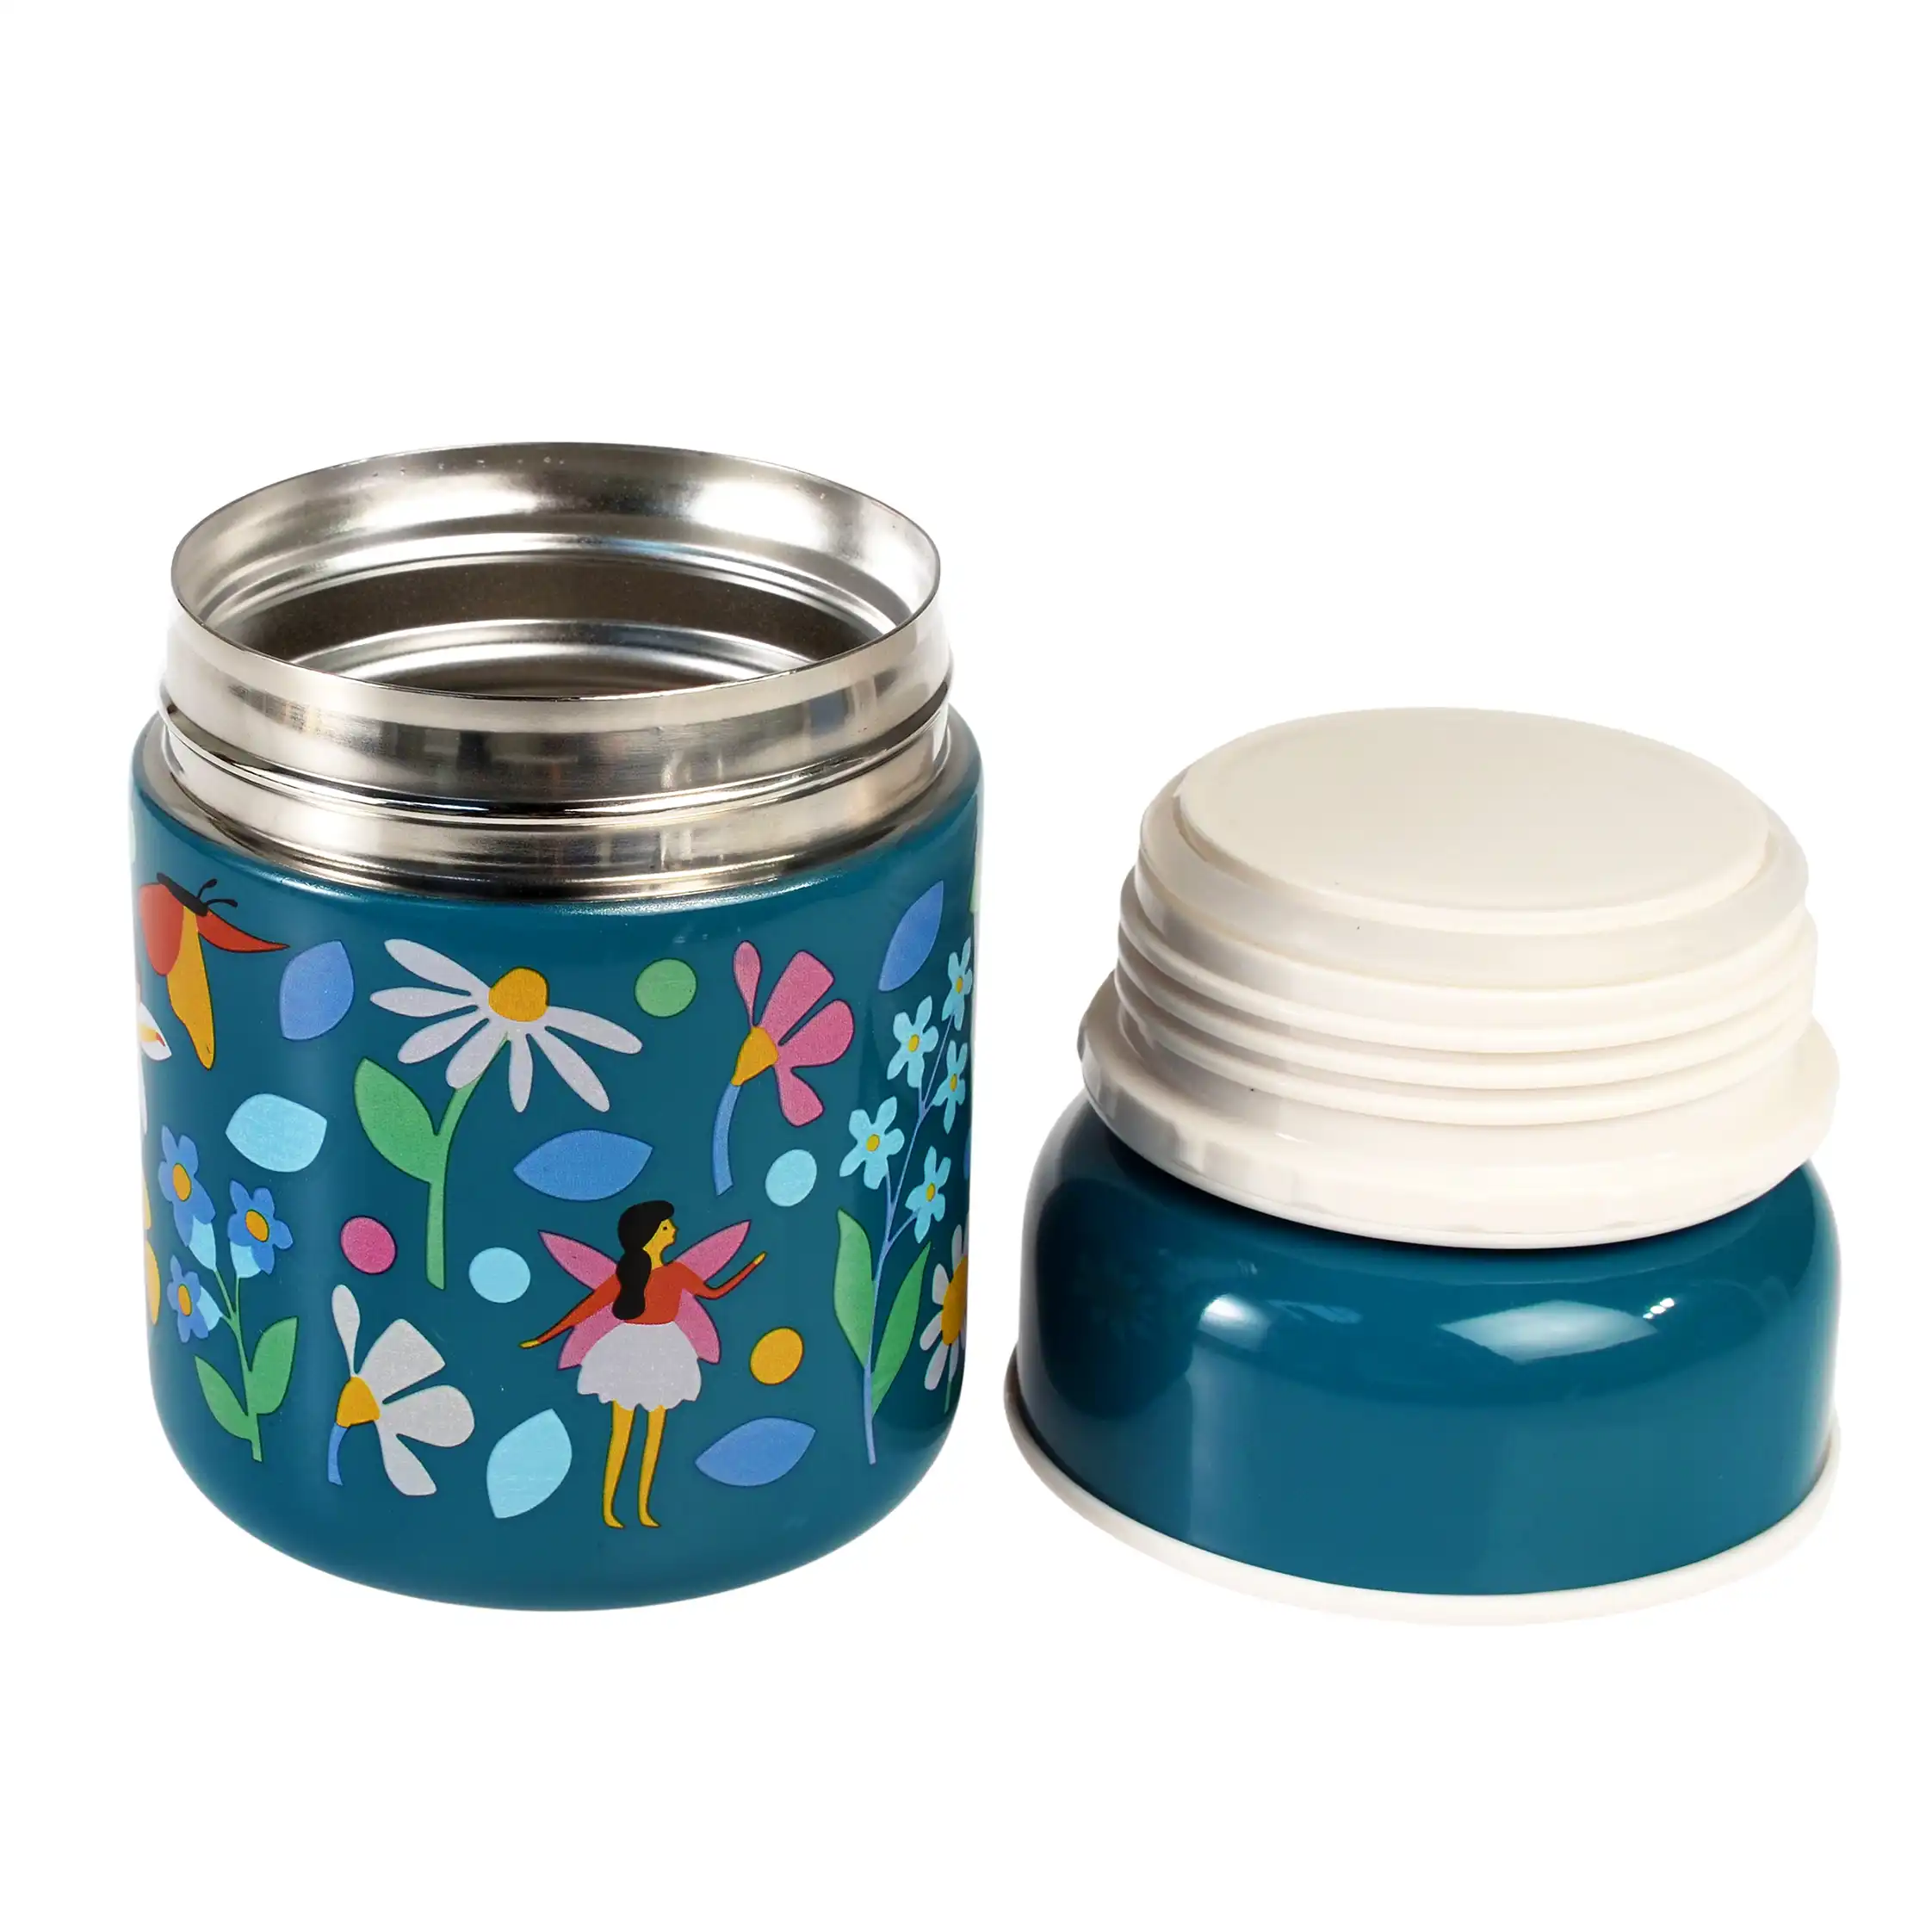 stainless steel food flask - fairies in the garden